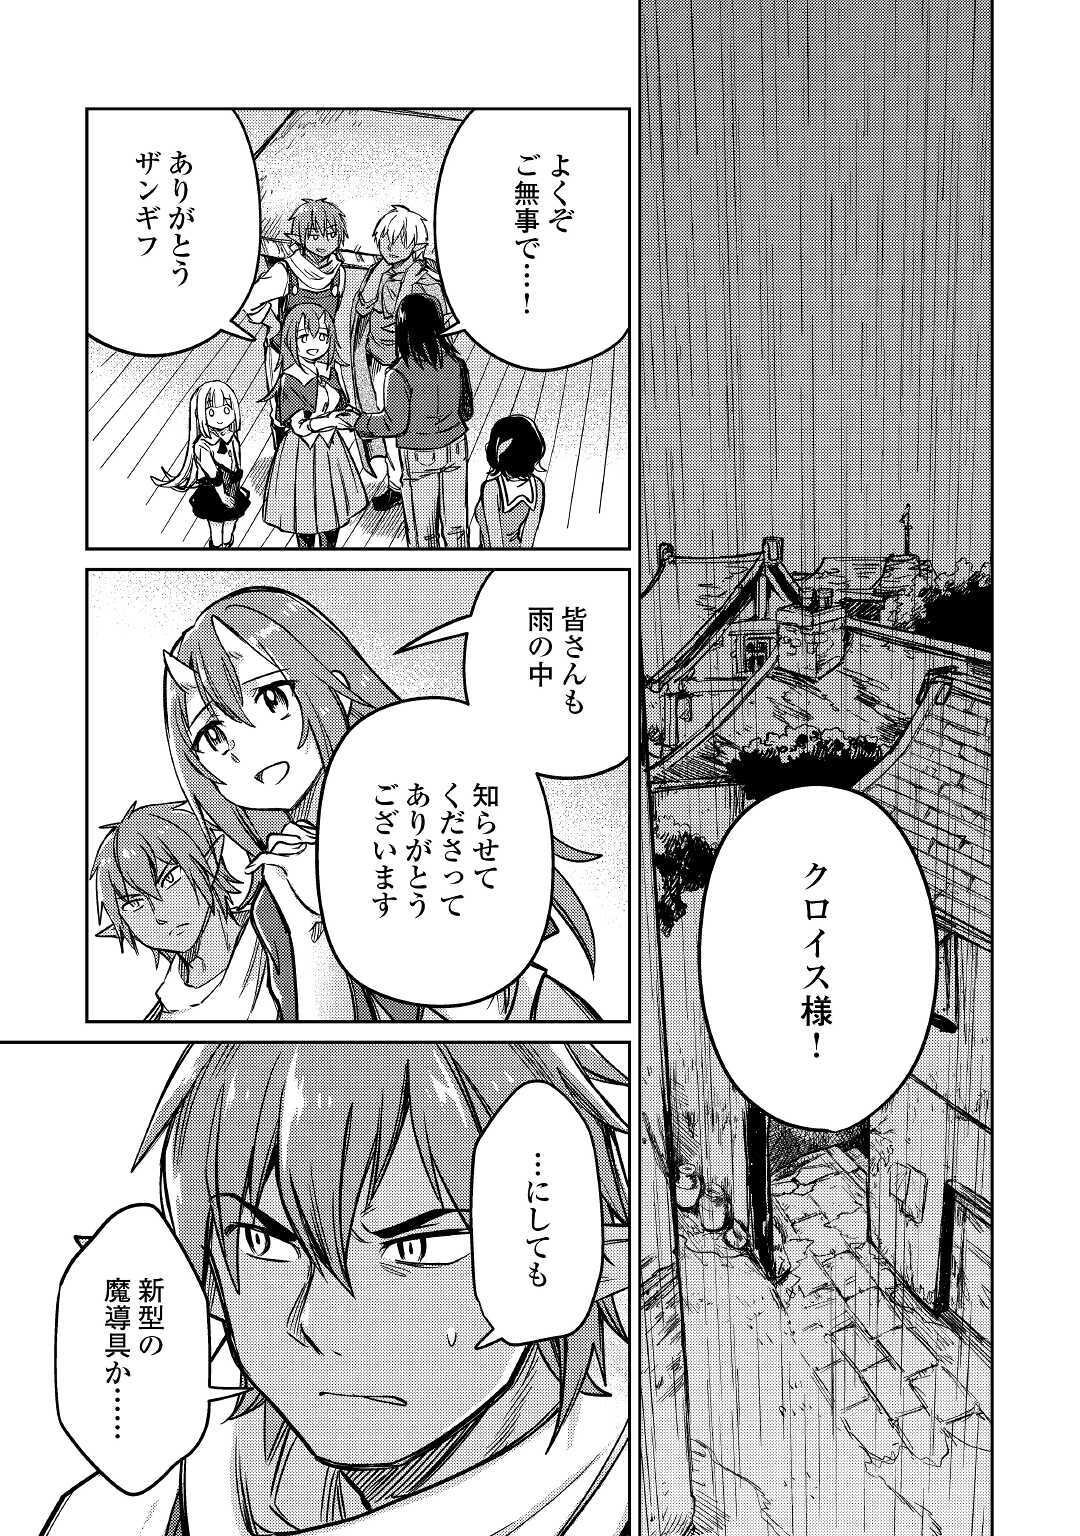 The Former Structural Researcher’s Story of Otherworldly Adventure 第26話 - Page 33